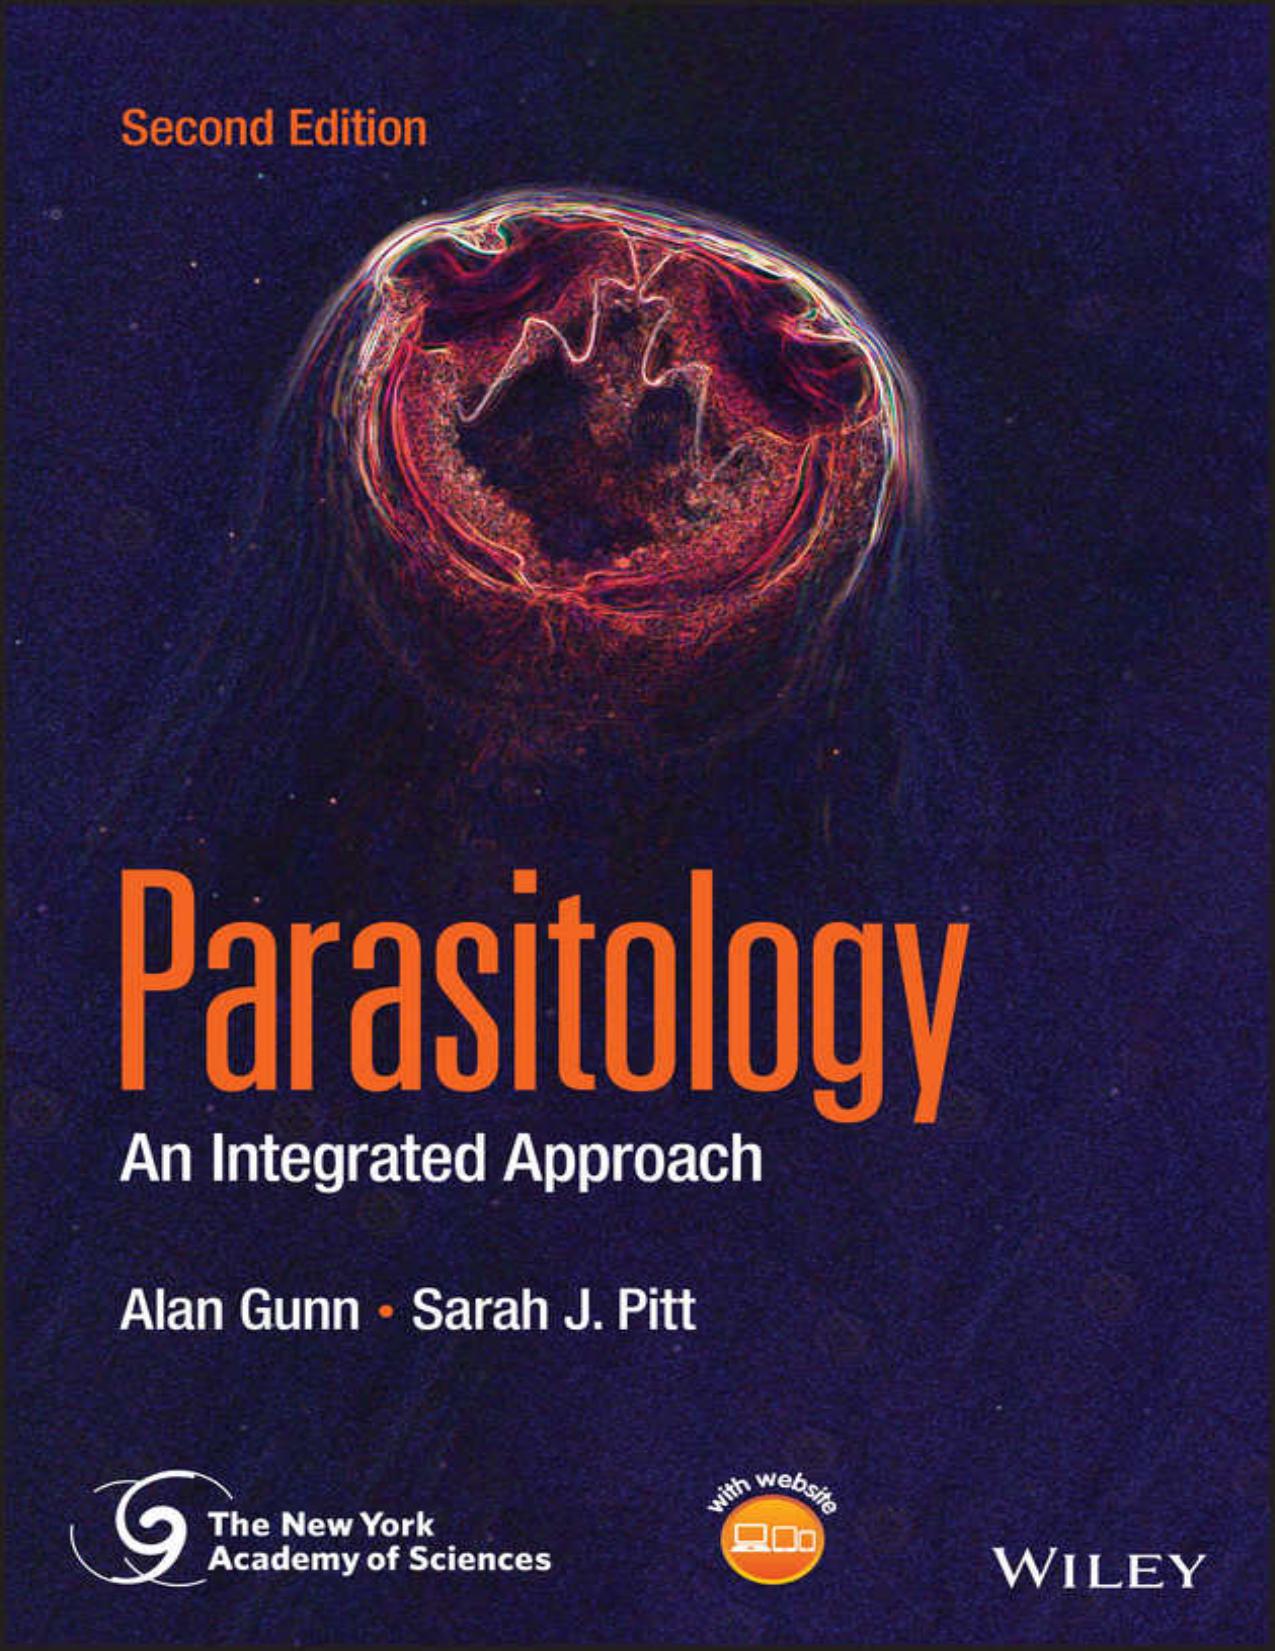 Parasitology (New York Academy of Sciences)